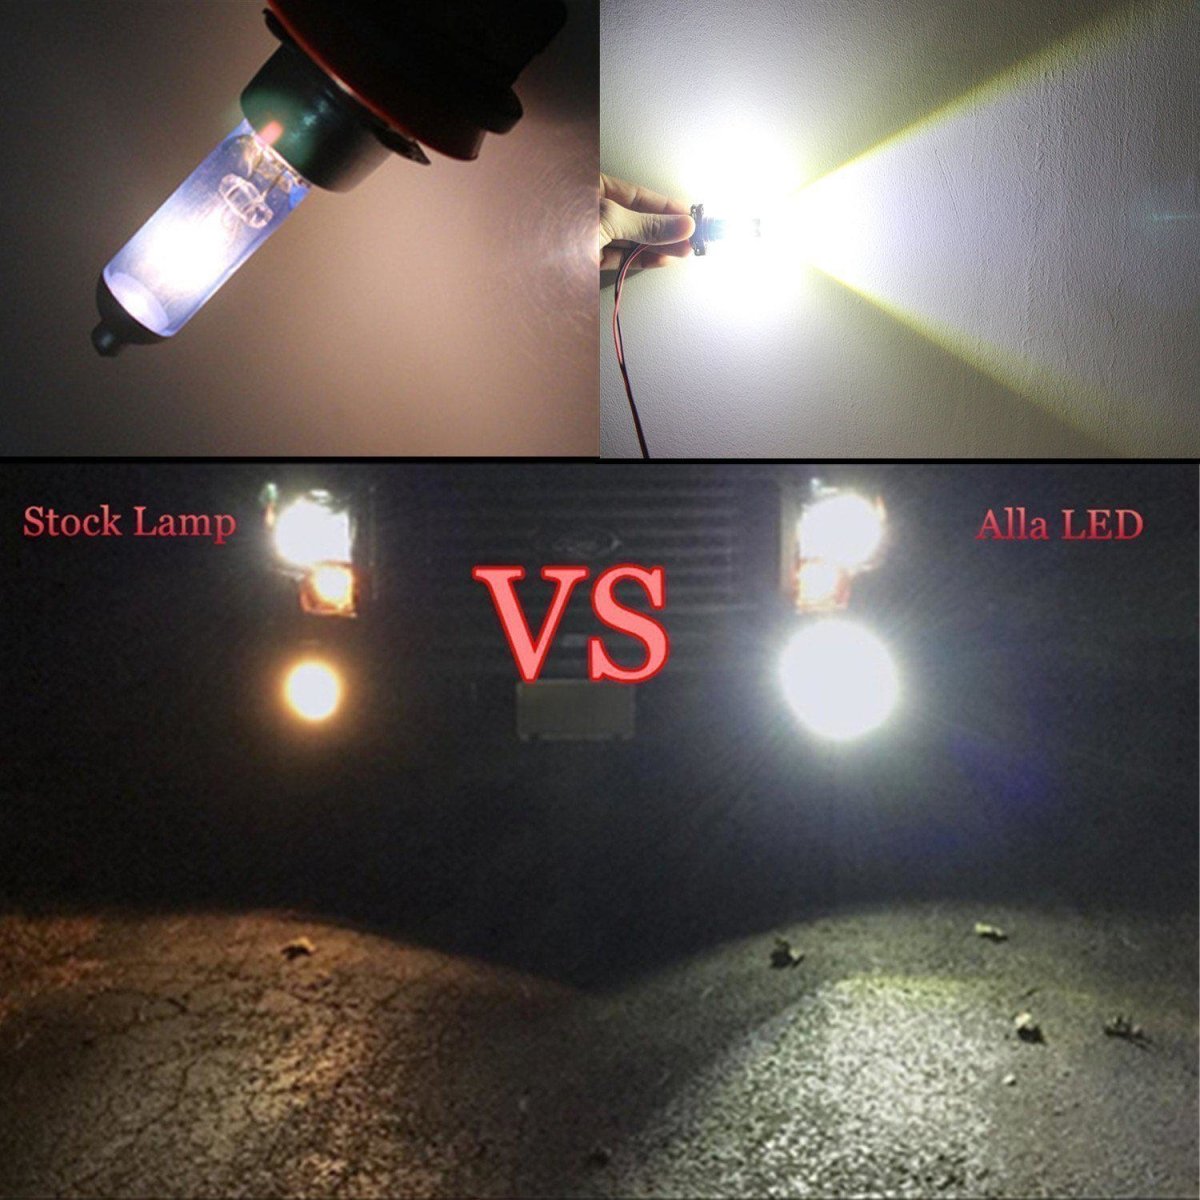 2504 PSX24W LED Bulbs 50W Cree Fog Lights Replacement for Cars, Trucks -Alla Lighting